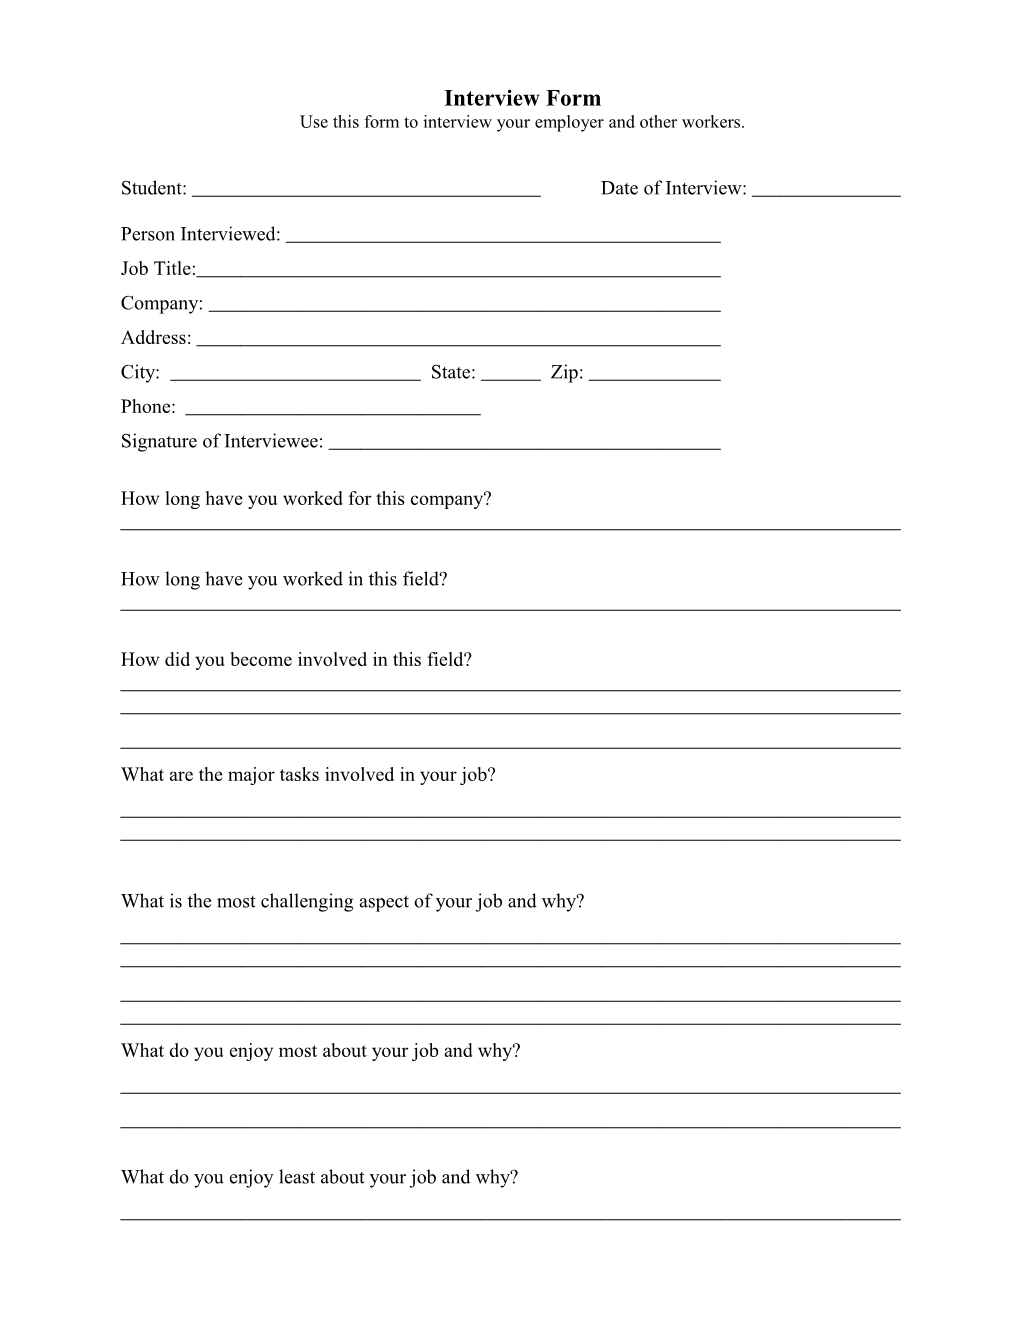 Use This Form to Interview Your Employer and Other Workers